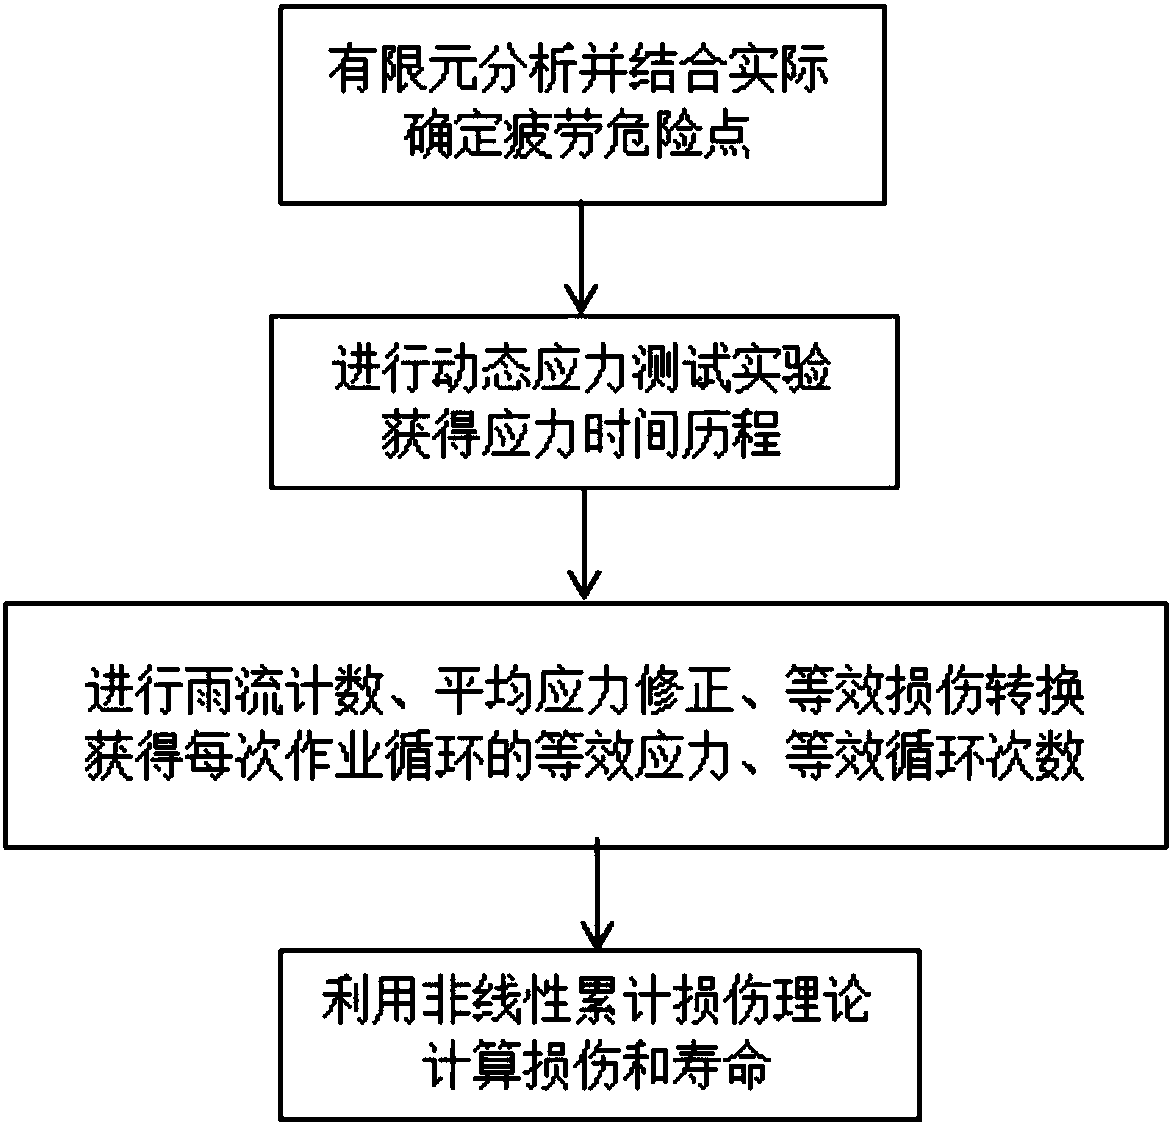 Fatigue life assessment method based on engineering machinery structure